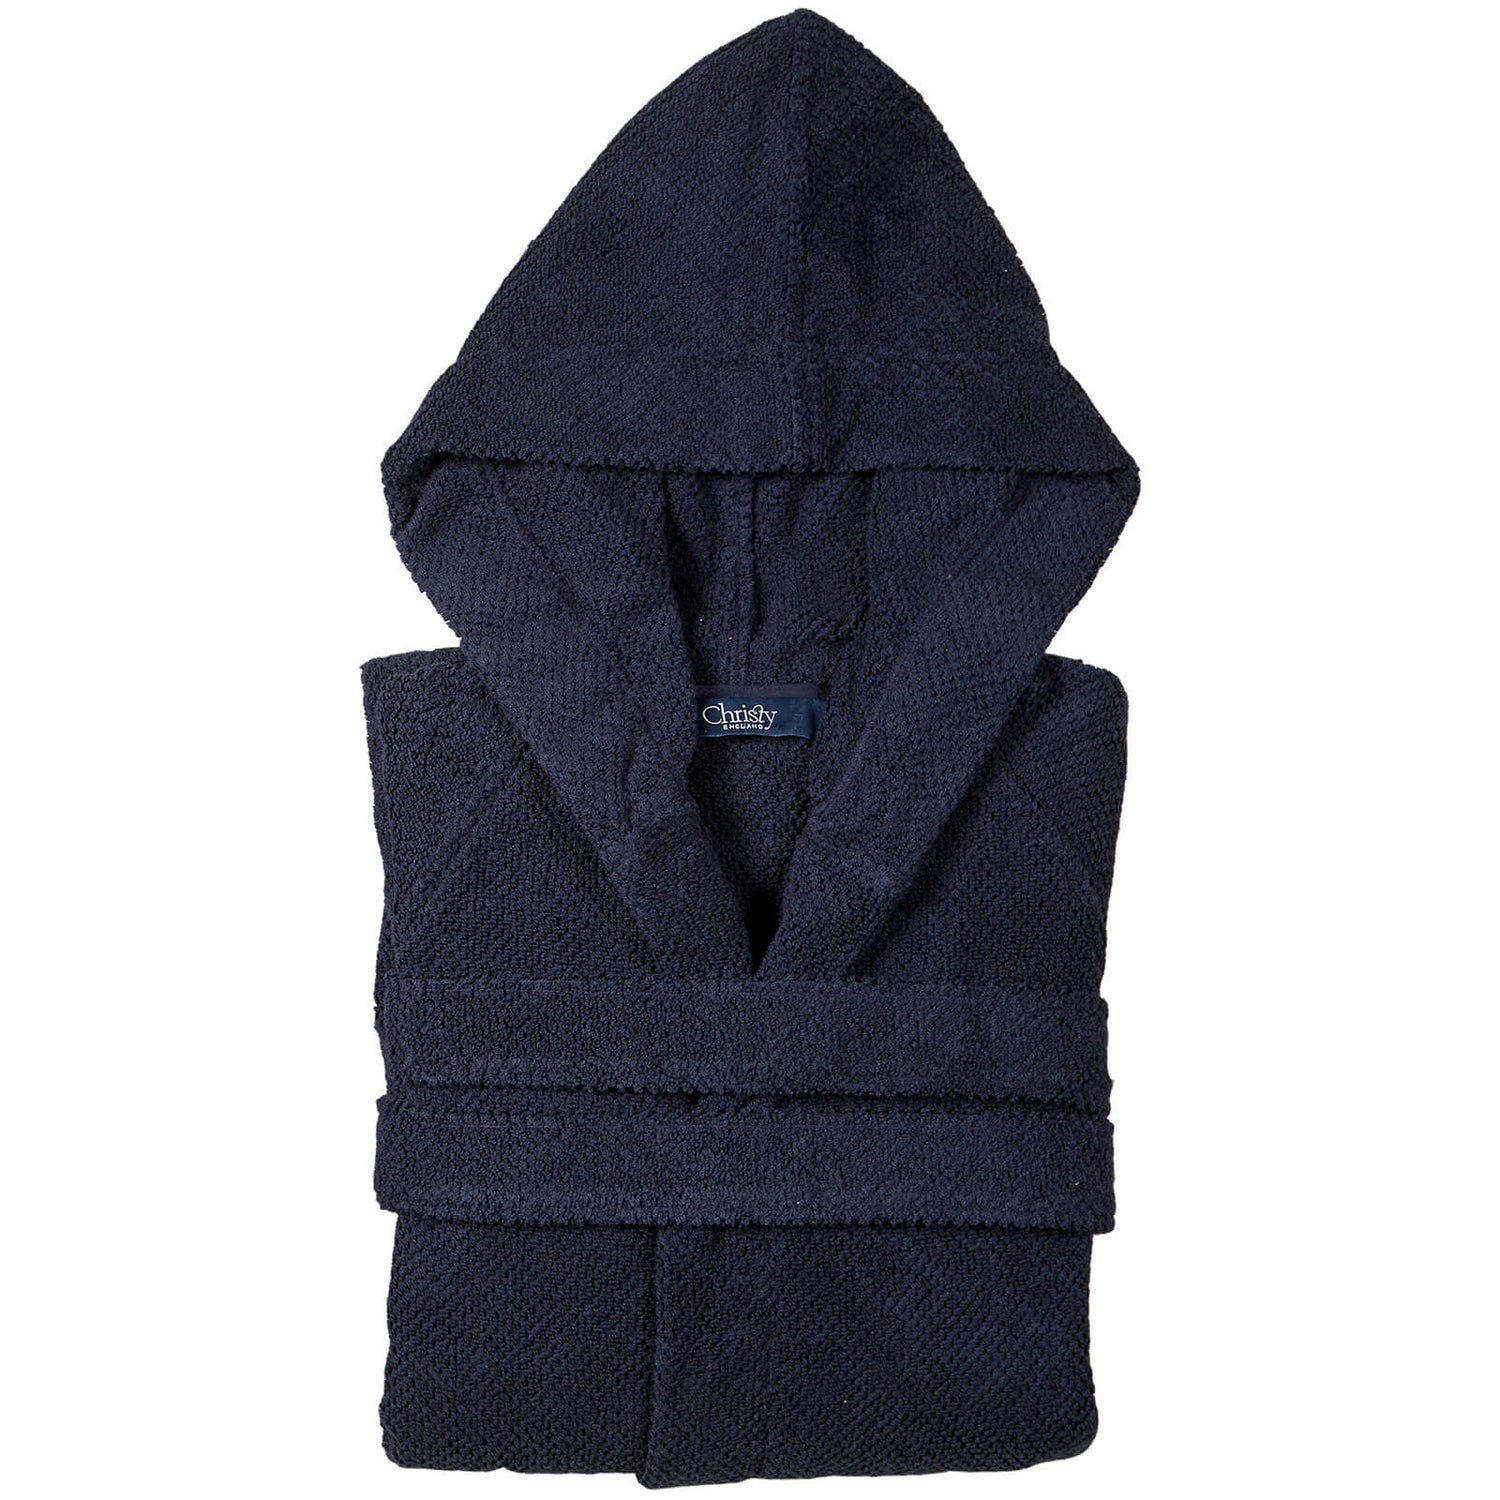 Christy Brixton Dressing Gown - Midnight - S